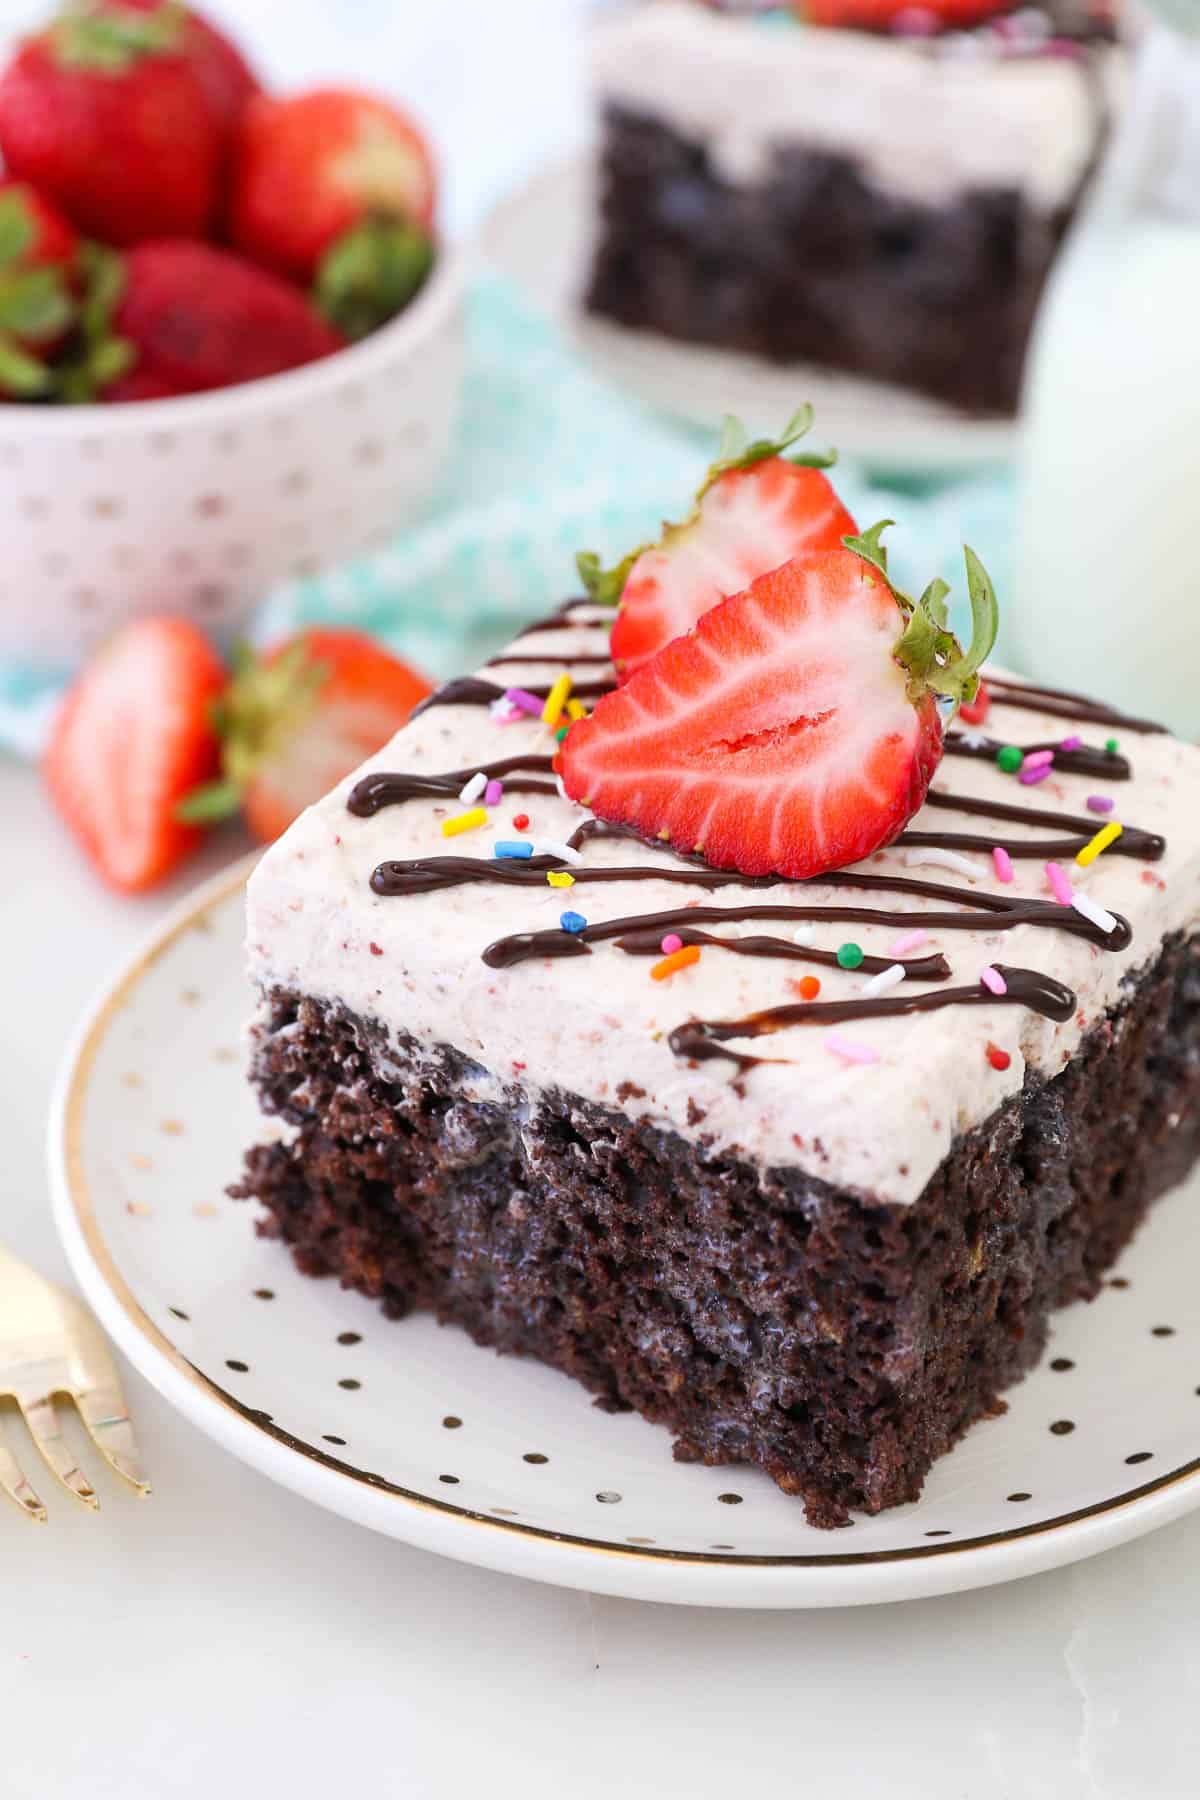 A slice of Chocolate Strawberry Milkshake Cake on a rimmed plate garnished with sprinkles, fudge and fresh strawberries